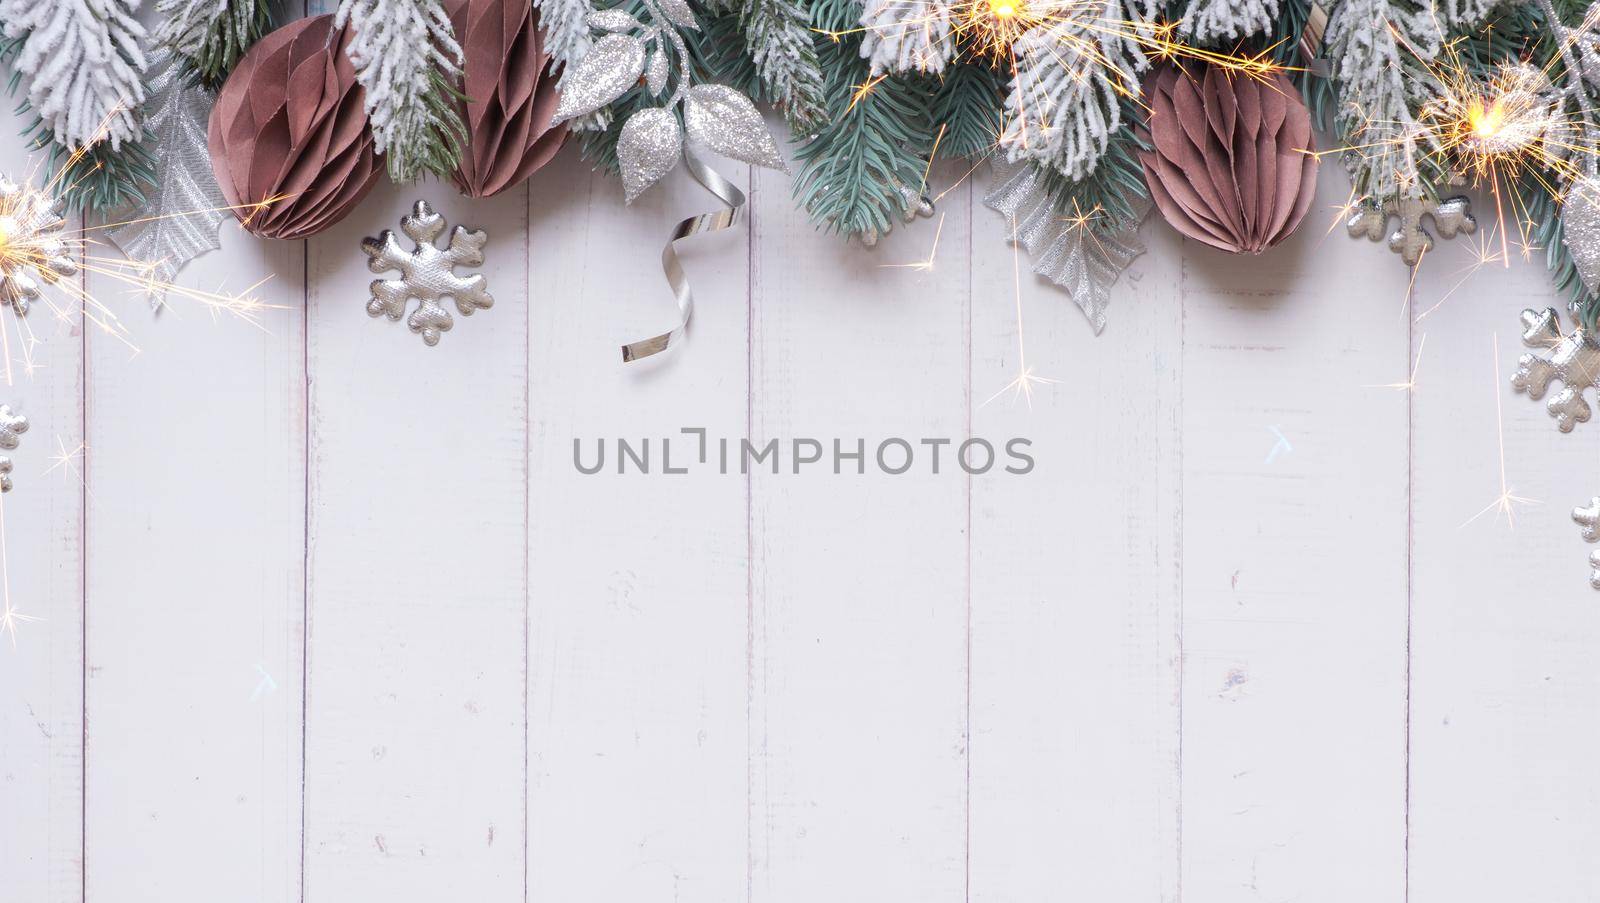 New Year Christmas flat lay with pine trees, paper Christmas toys and tinsel on wooden background with copy space.